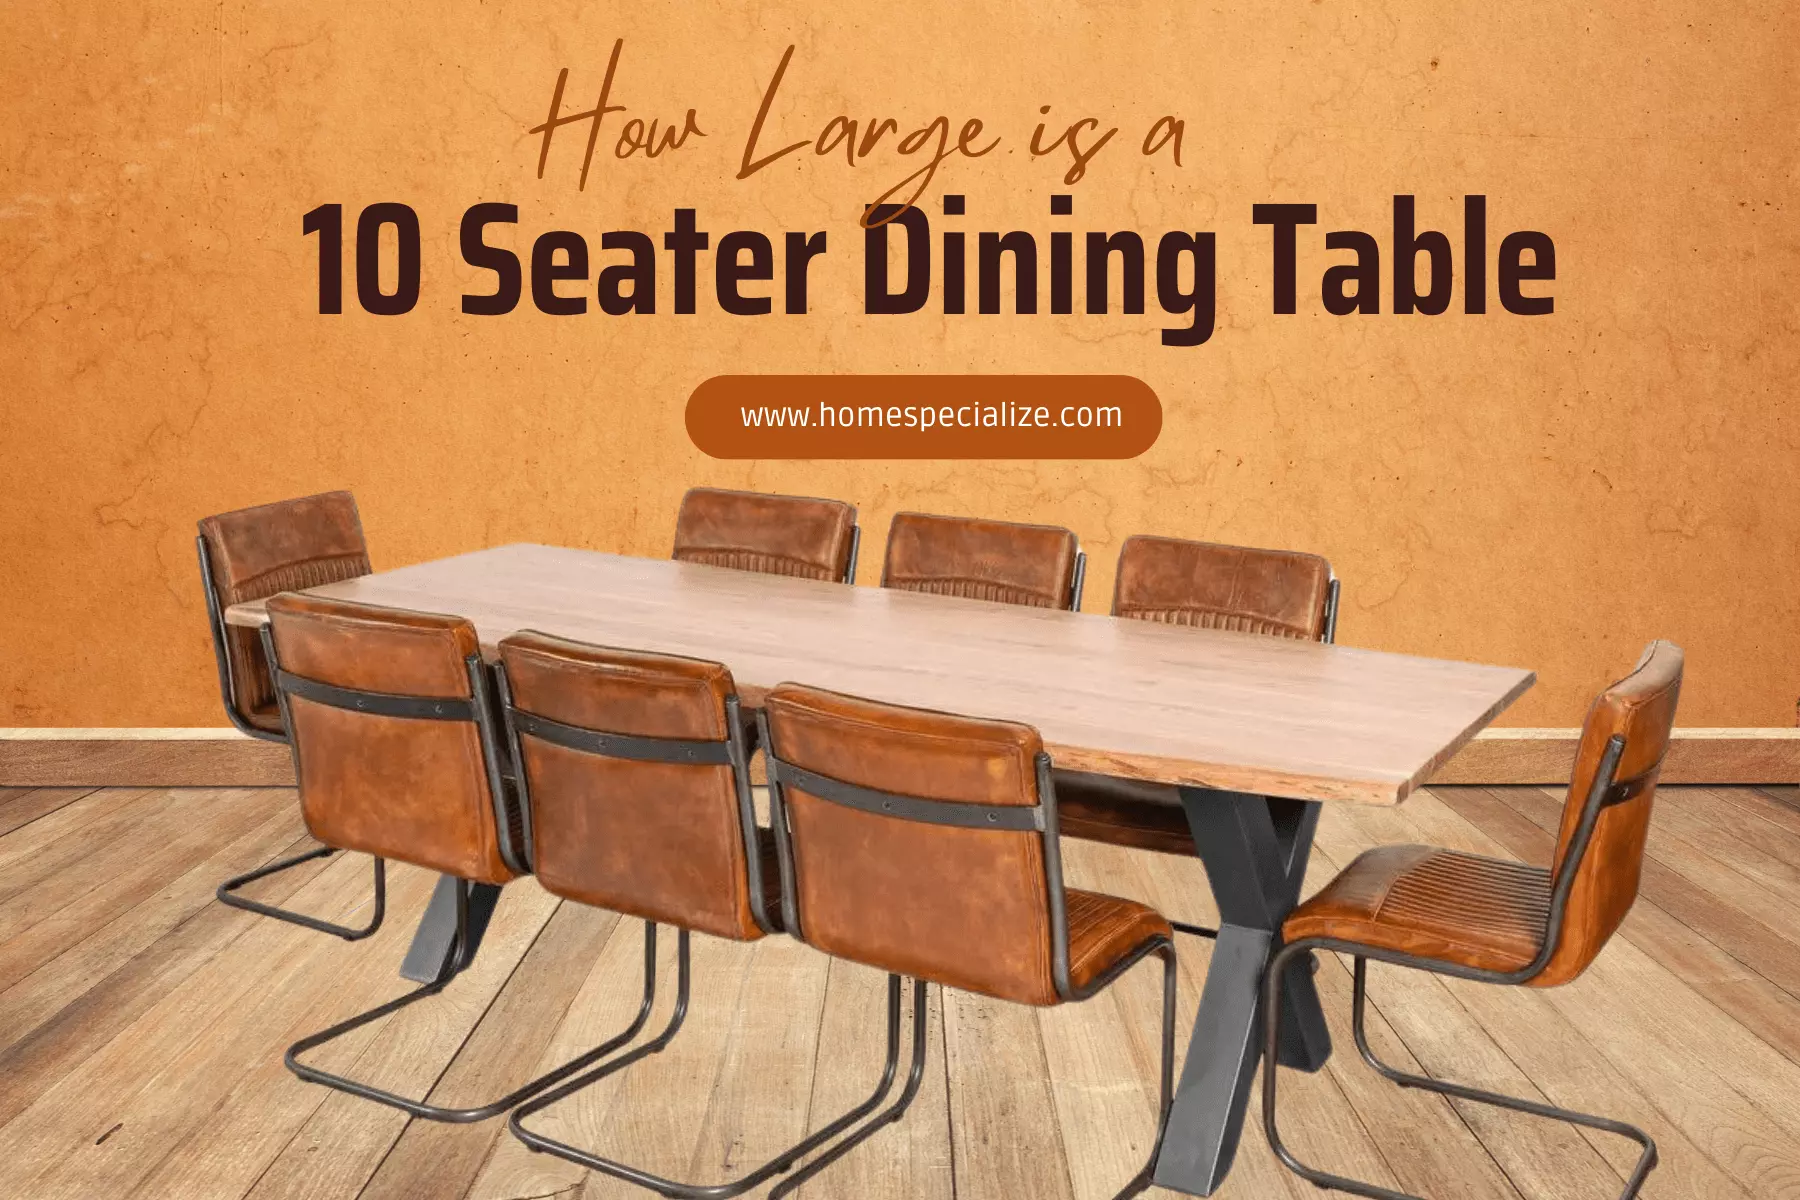 How Large is a 10 Seater Dining Table? Find Out the Perfect Dimensions!